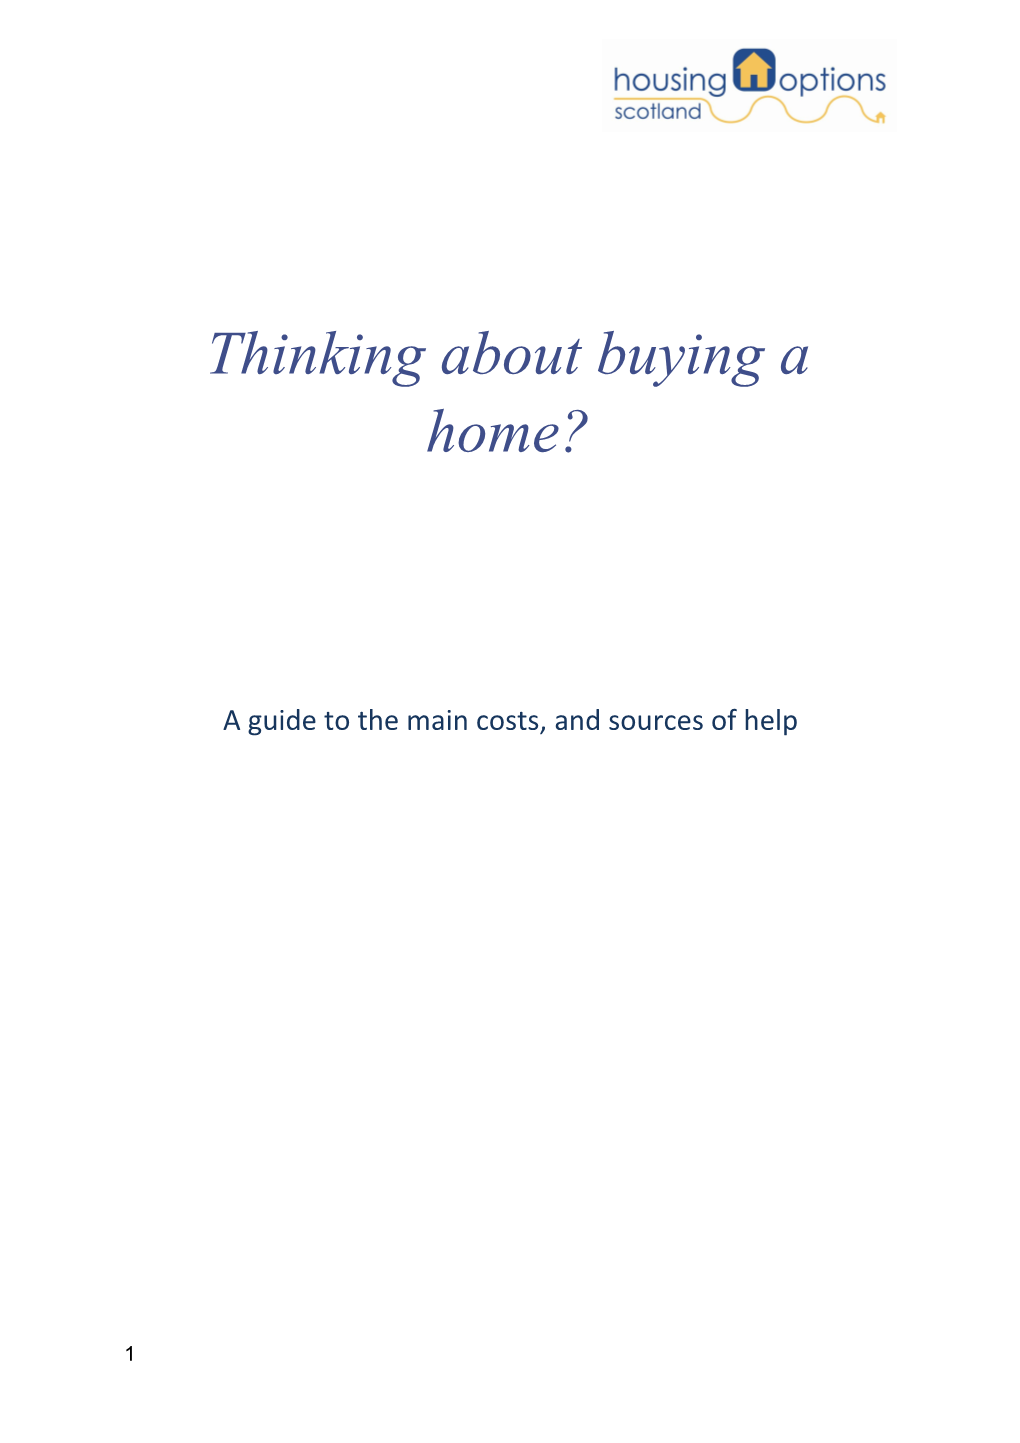 A Guide to the Main Costs, and Sources of Help